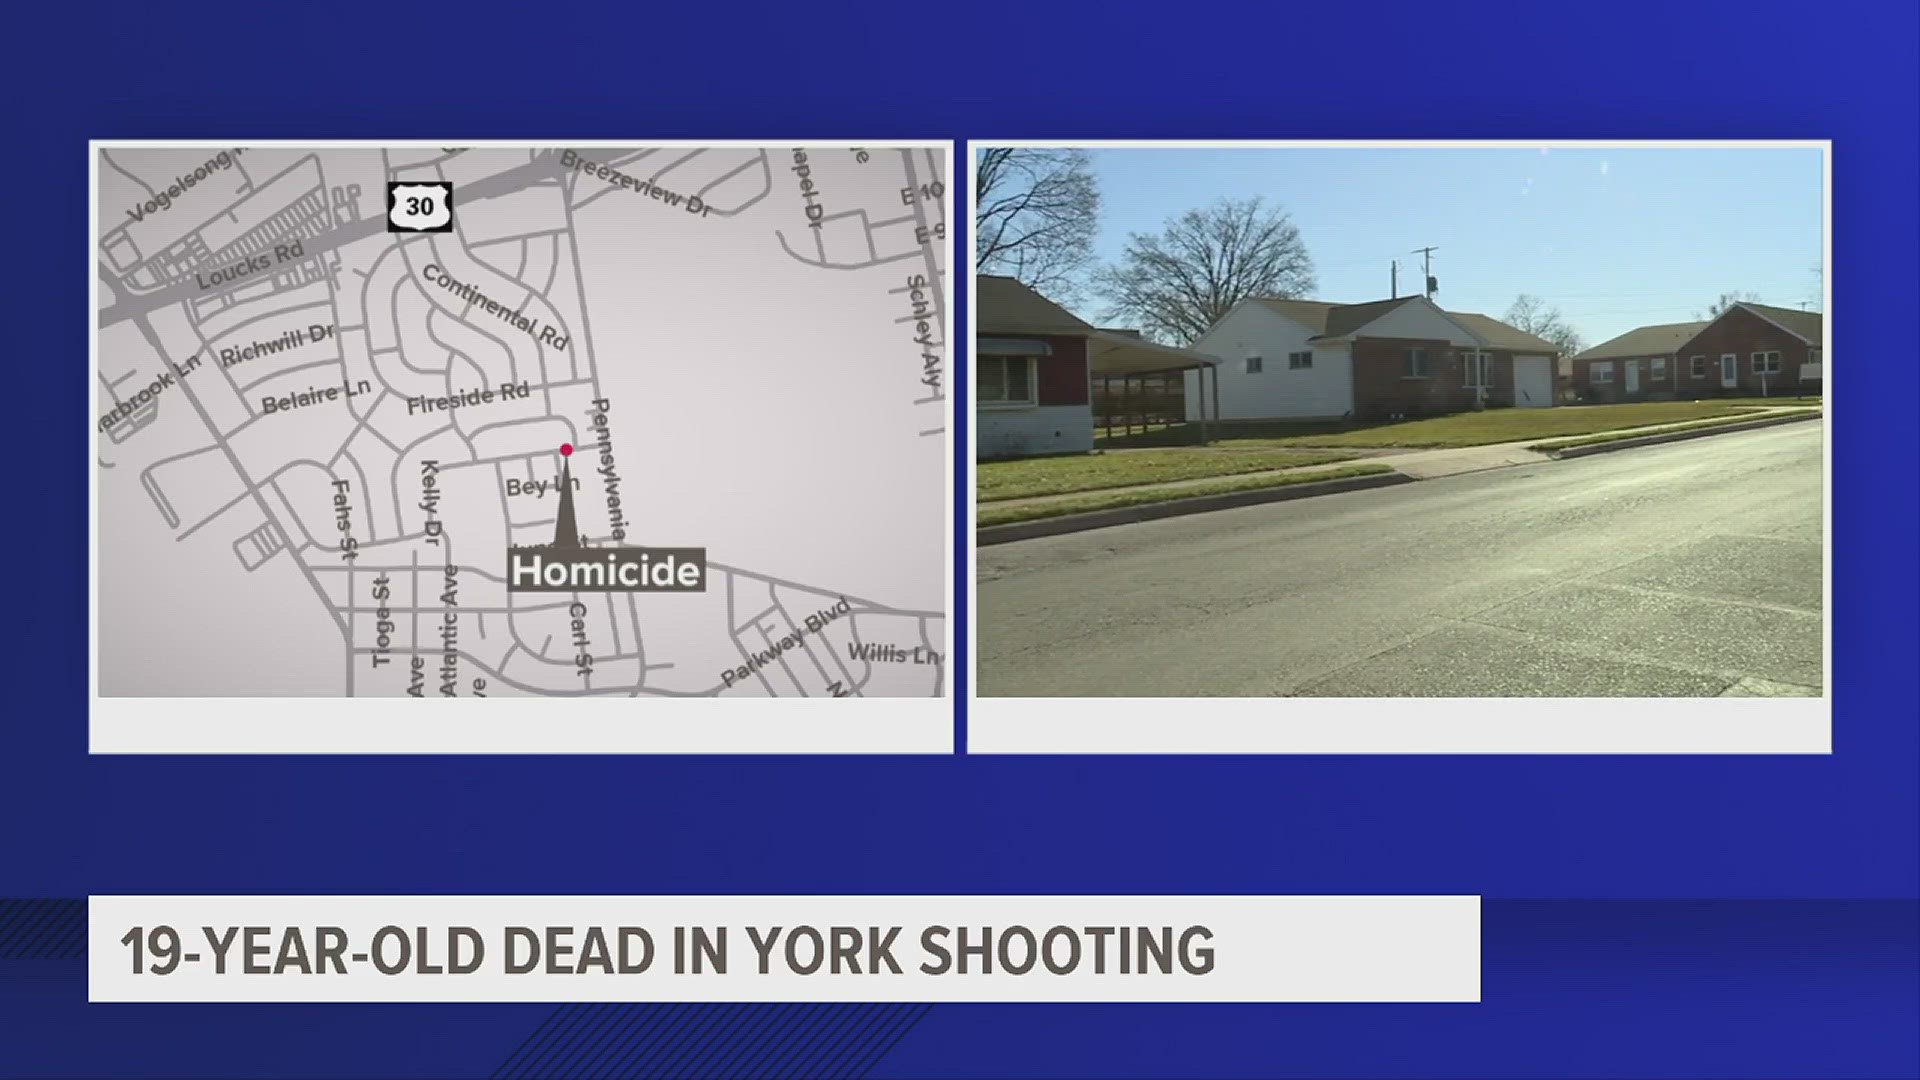 On Wednesday, March 8, York City Police responded to the 700 block of Kelly Drive and discovered the body of a 19-year-old.